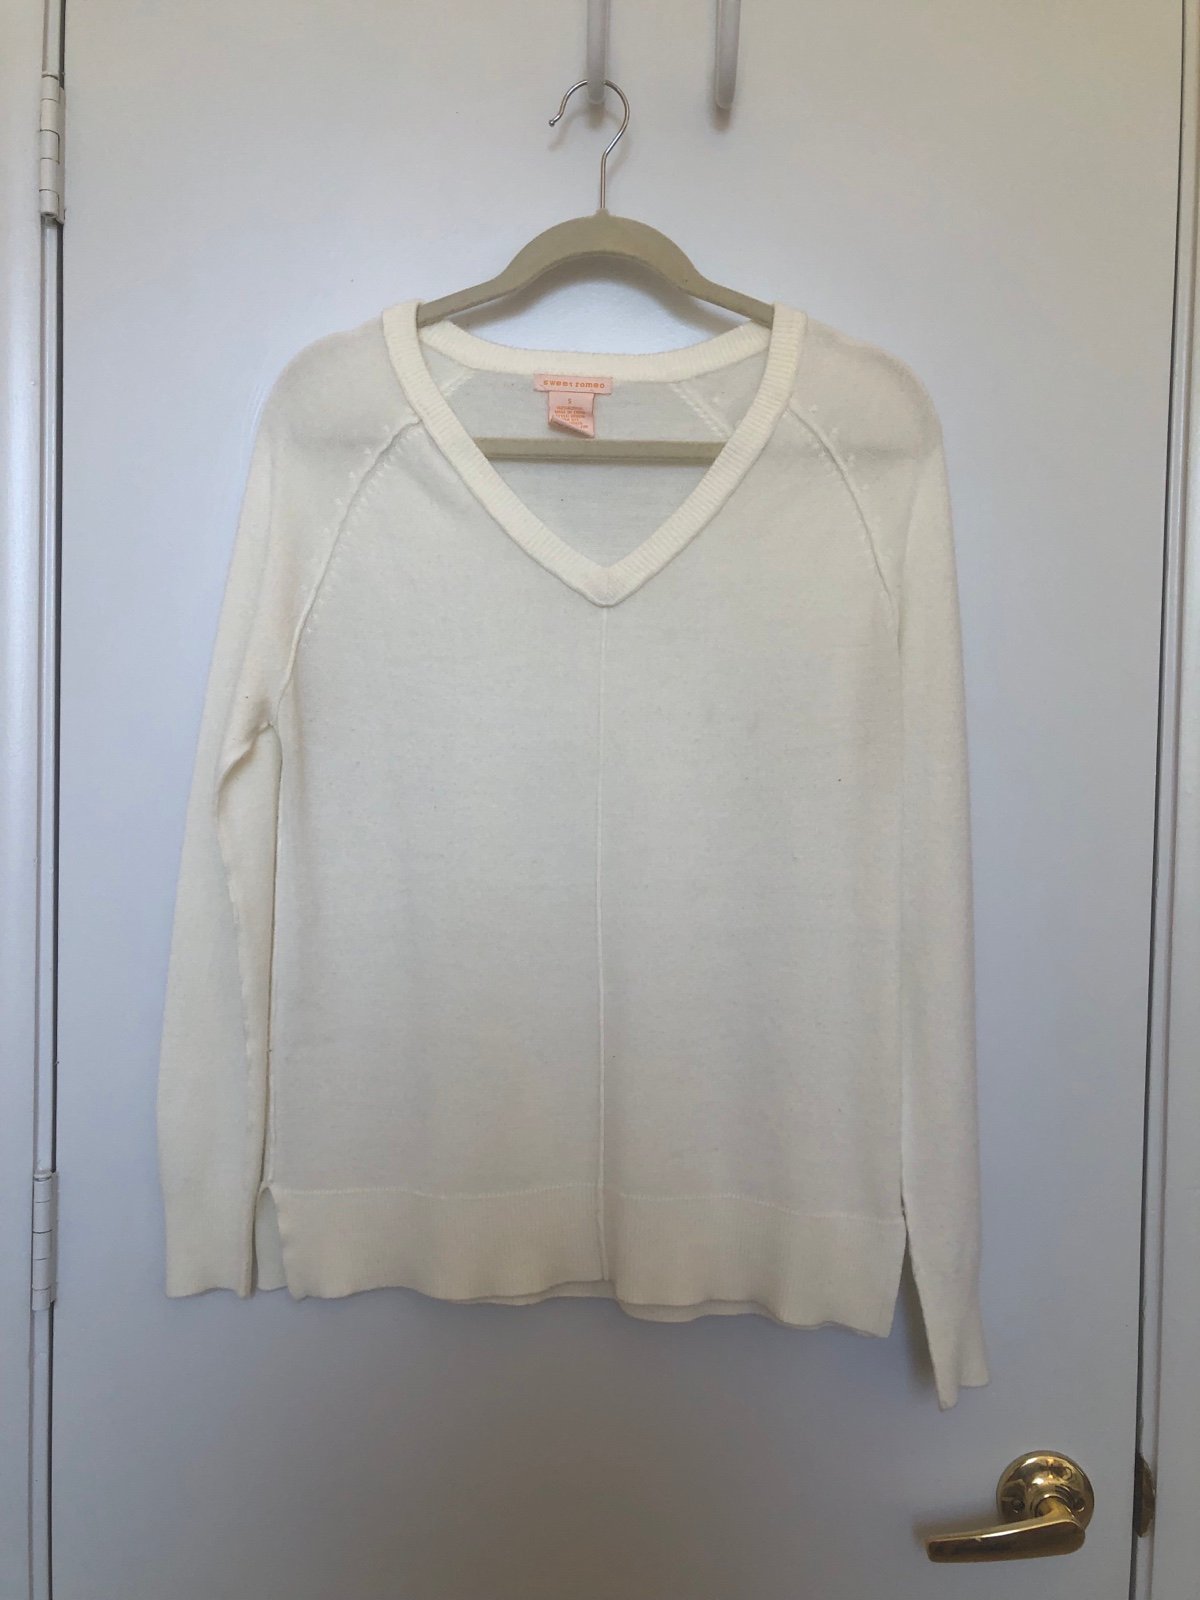 Authentic Lightweight White Sweater ItymGqeNx Counter G